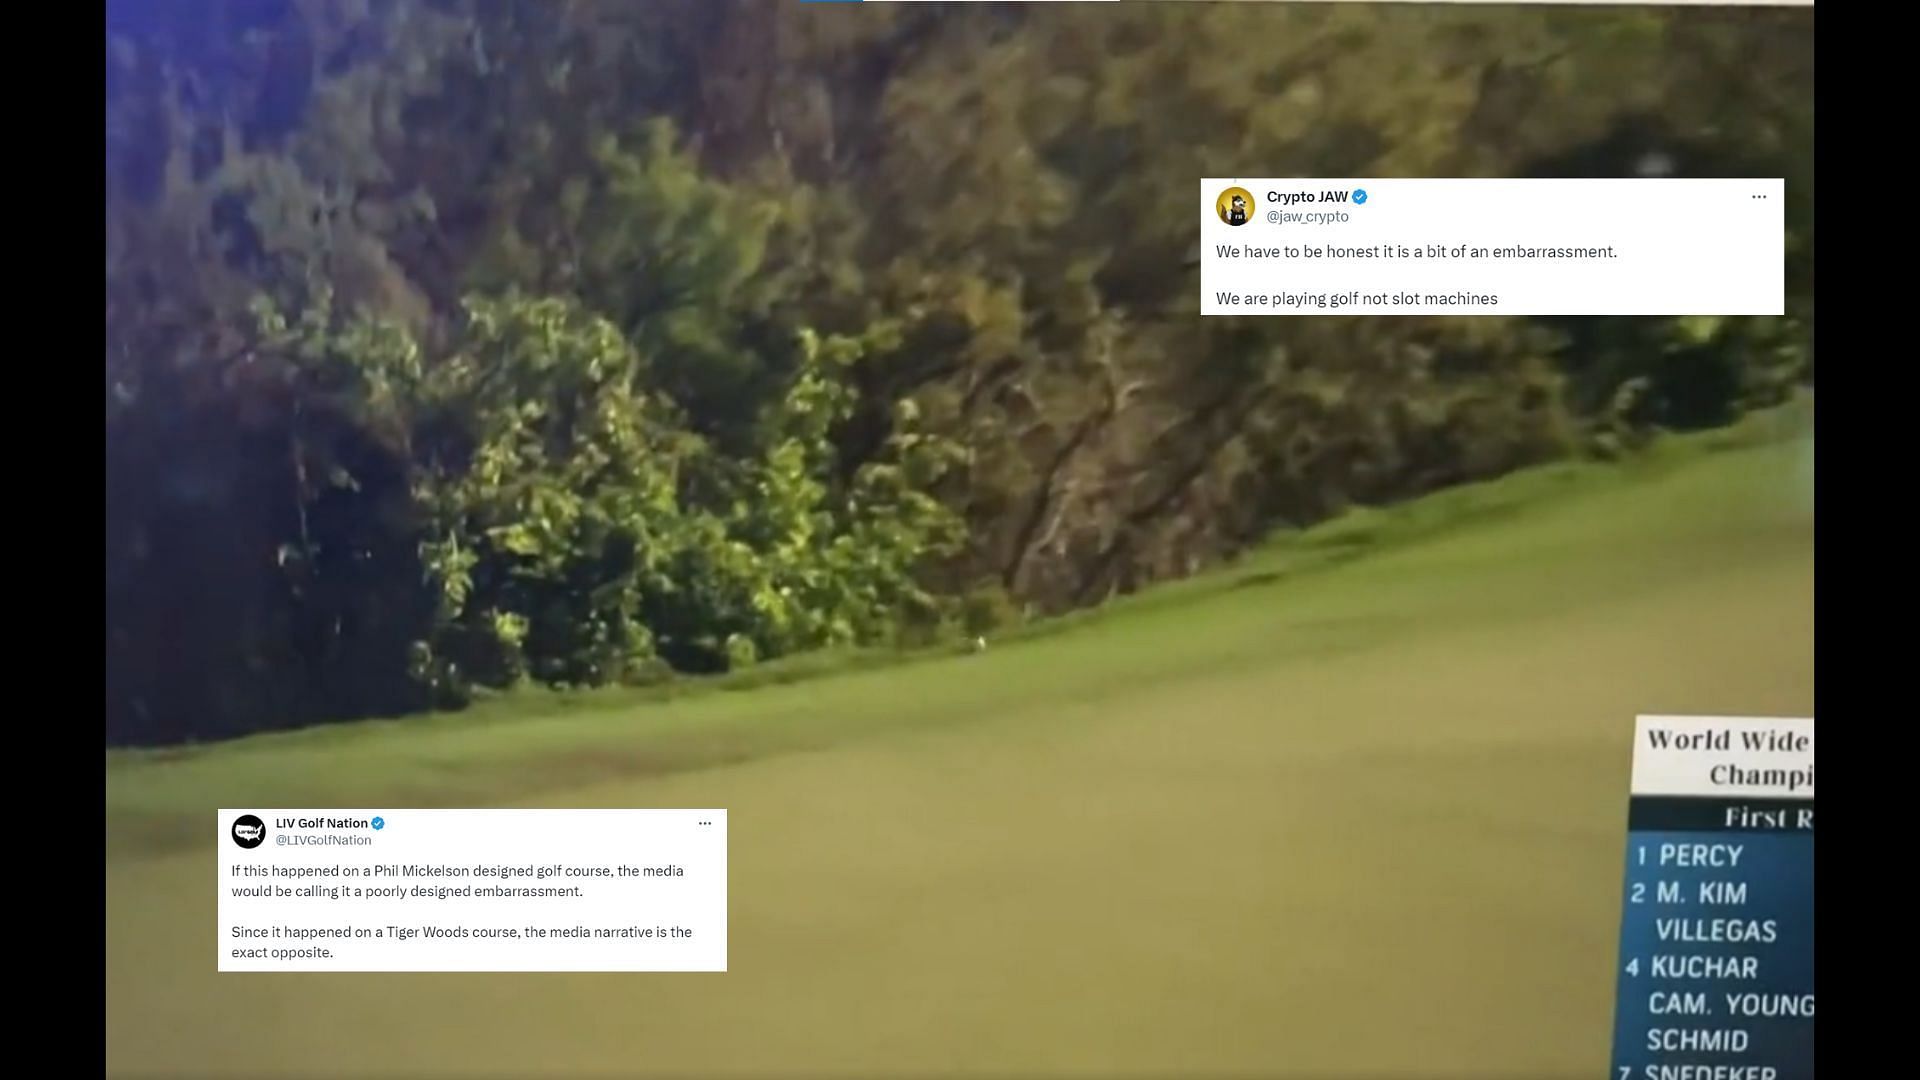 &ldquo;We have to be honest it is a bit of an embarrassment&rdquo;: Tiger Woods designed golf course faces scrutiny from fans after watching Thomas Detry&rsquo;s shot 